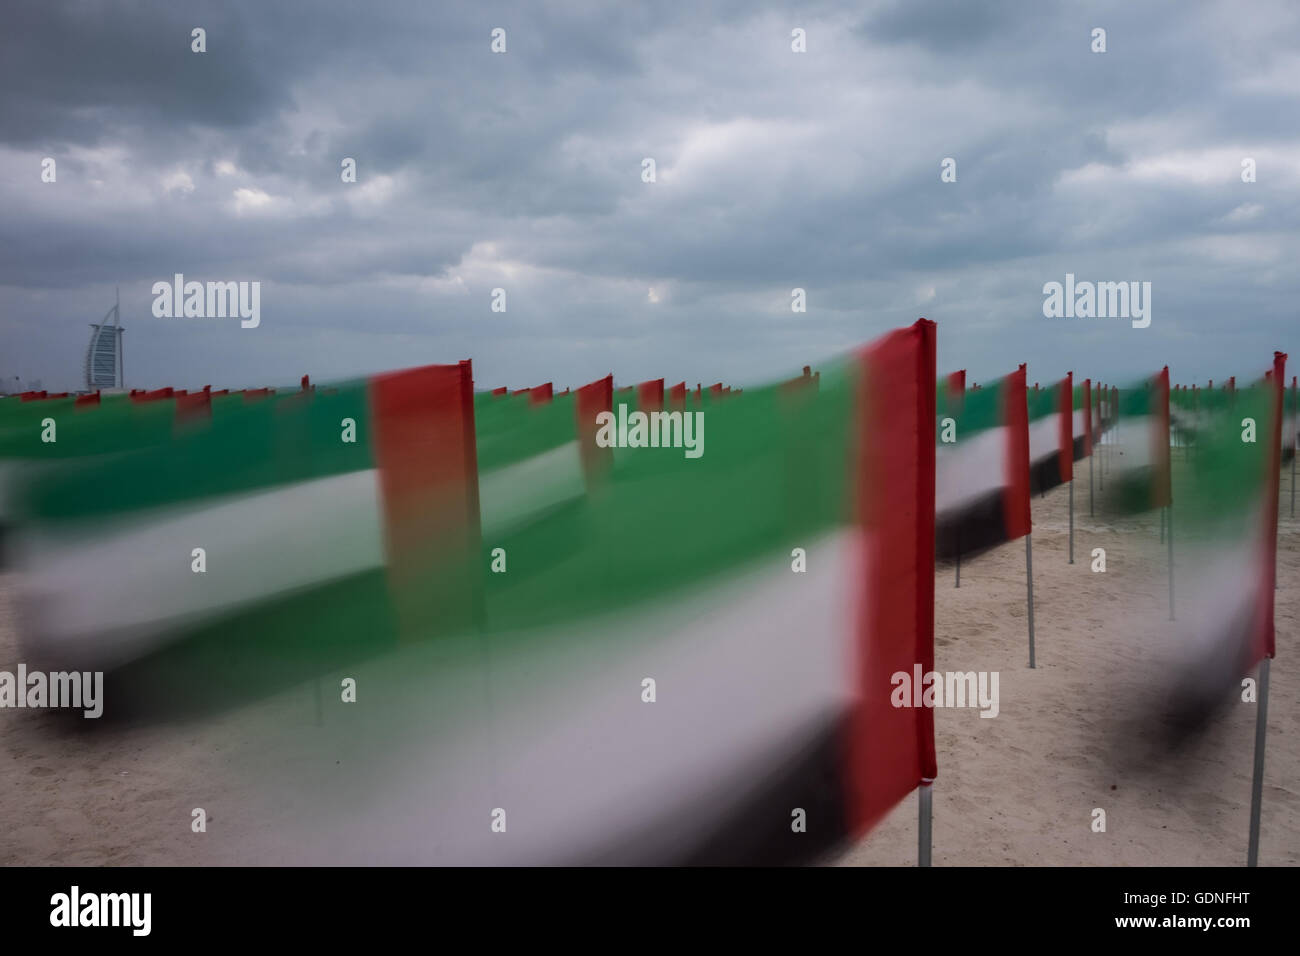 UAE flags on display for National Day on the Jumeirah Beach, with the iconic Burj al Arab in the background. Stock Photo